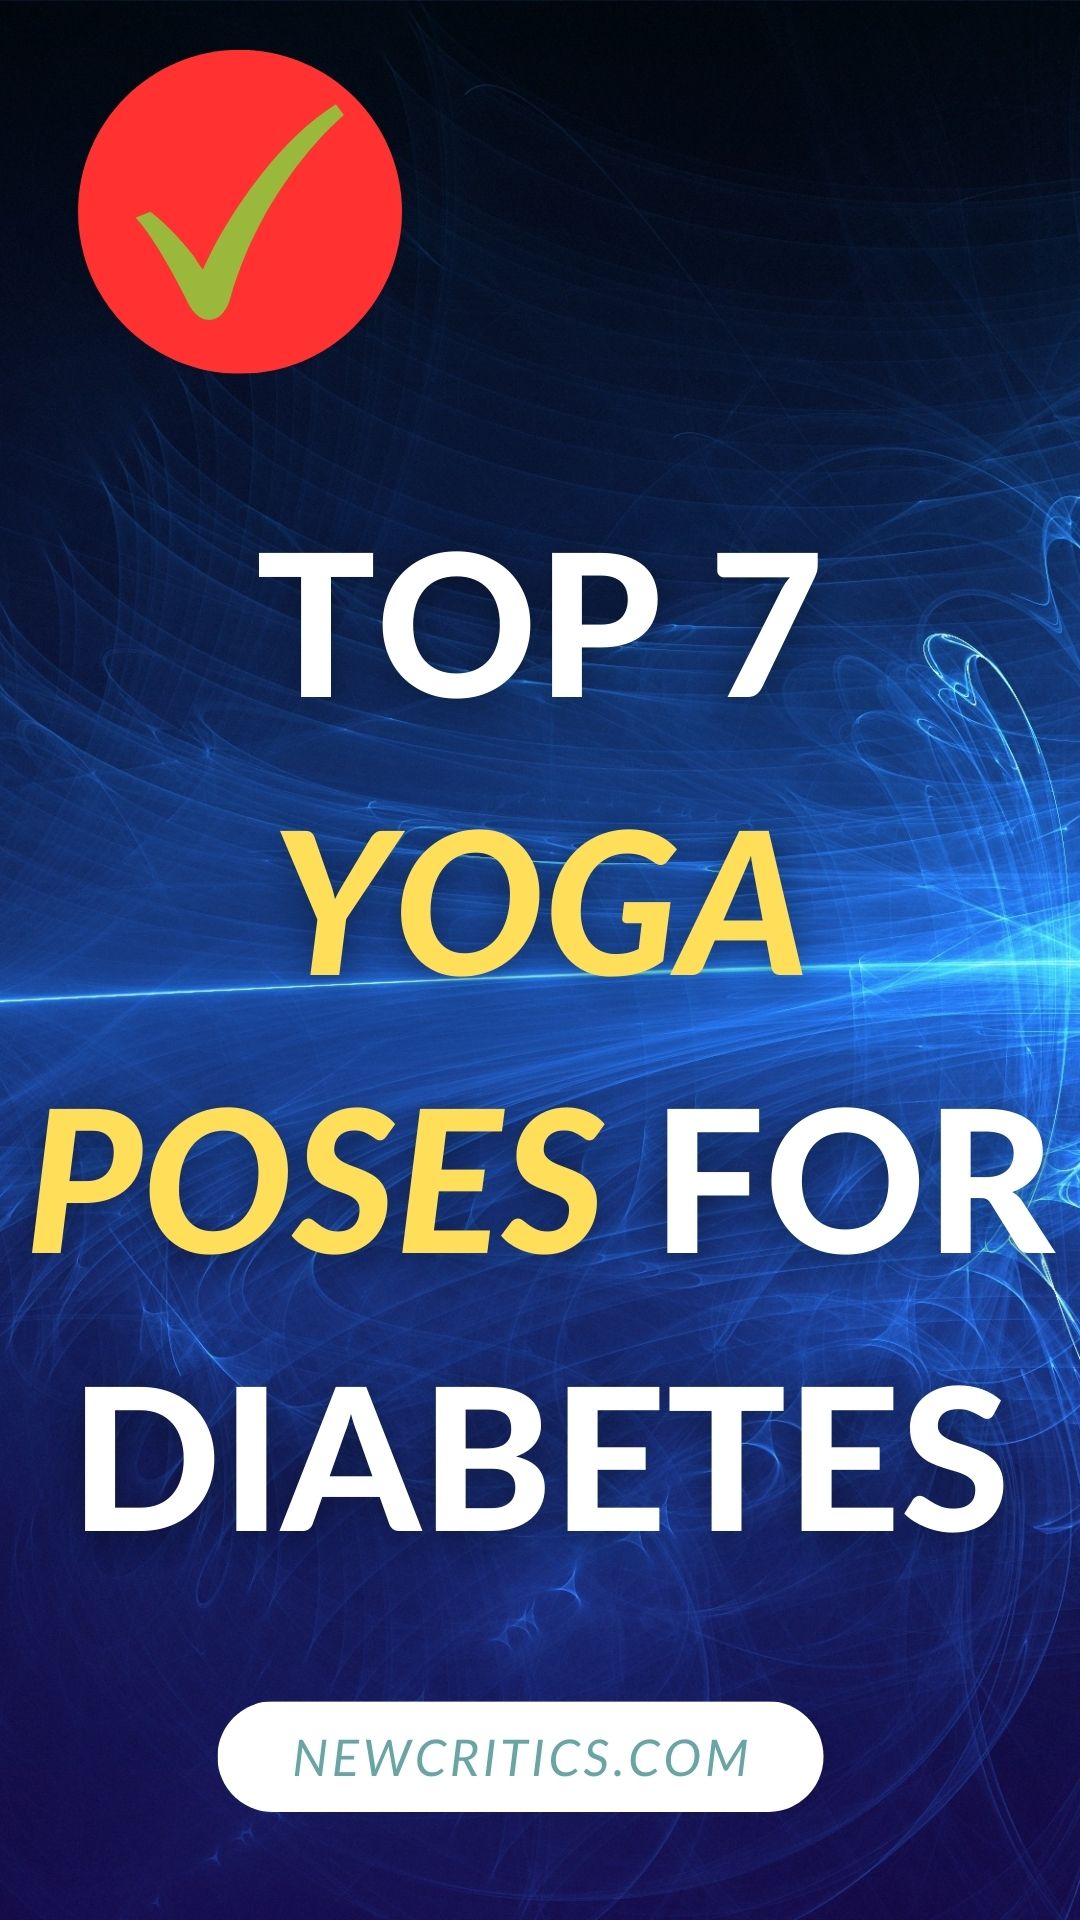 Top 7 Yoga Poses For Diabetes / Canva